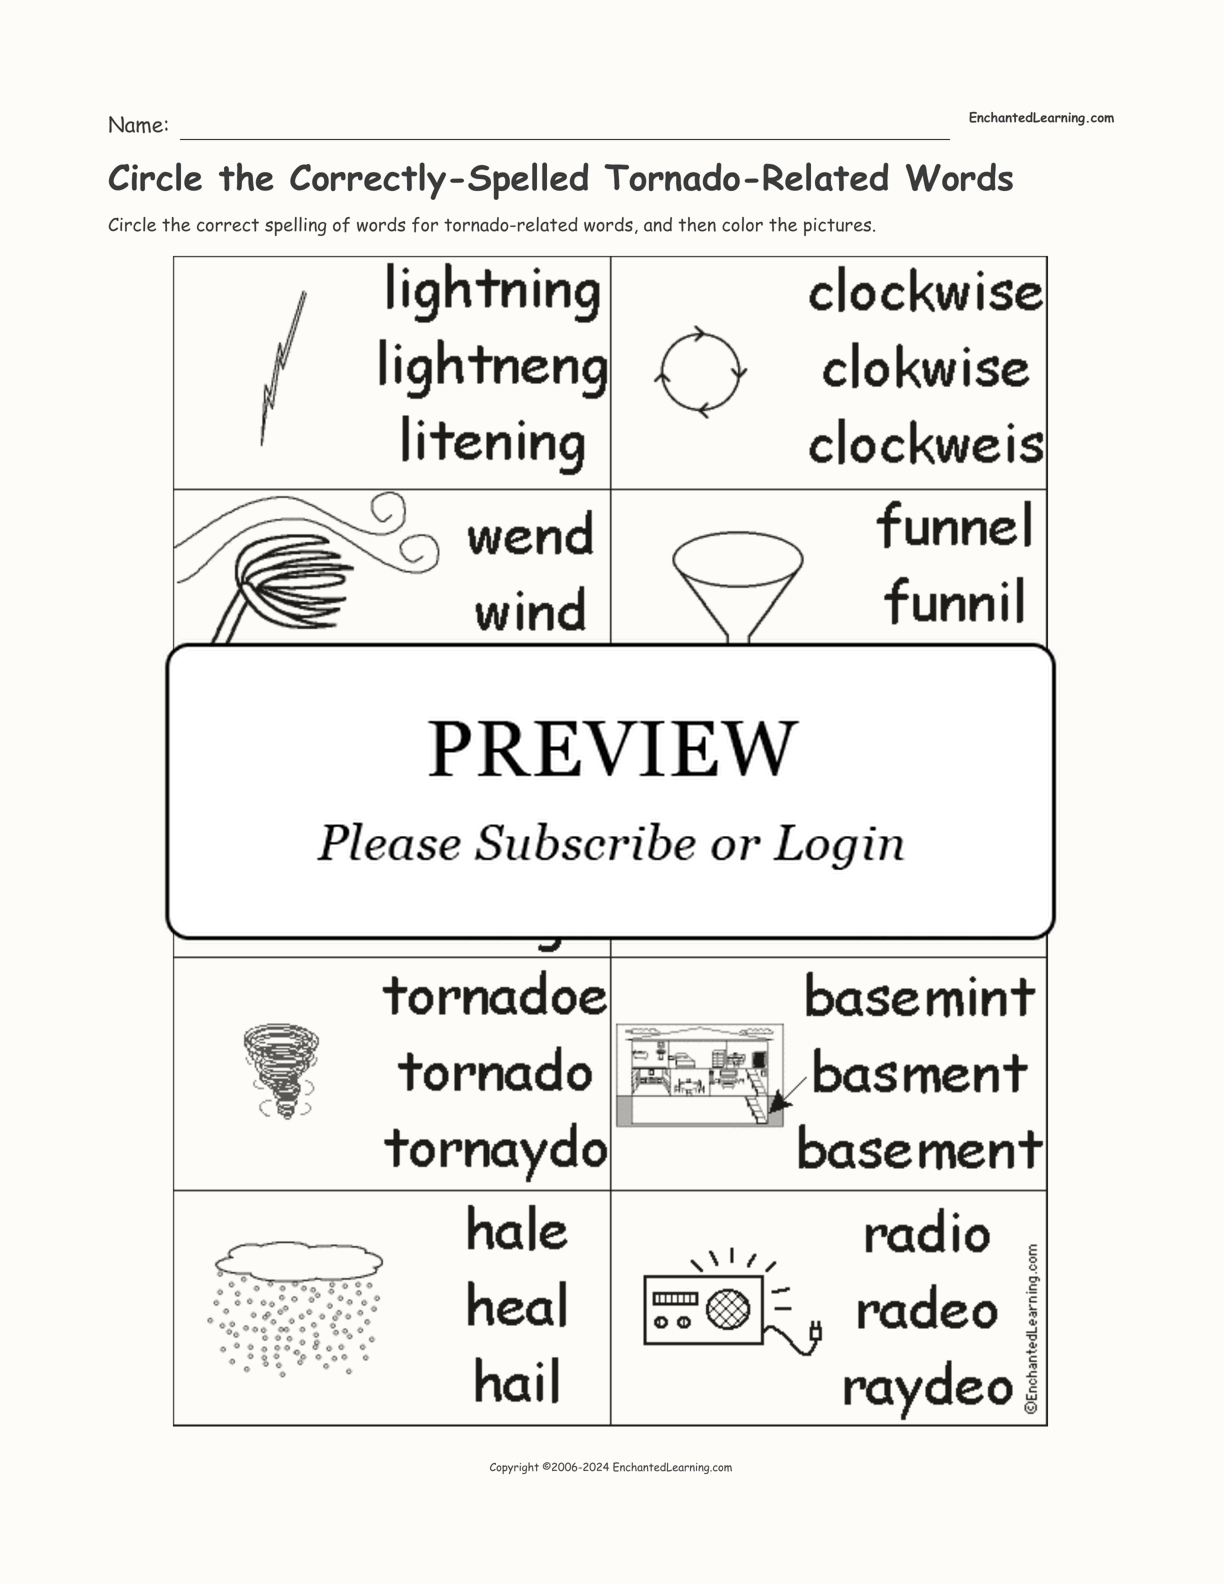 Circle the Correctly-Spelled Tornado-Related Words interactive worksheet page 1